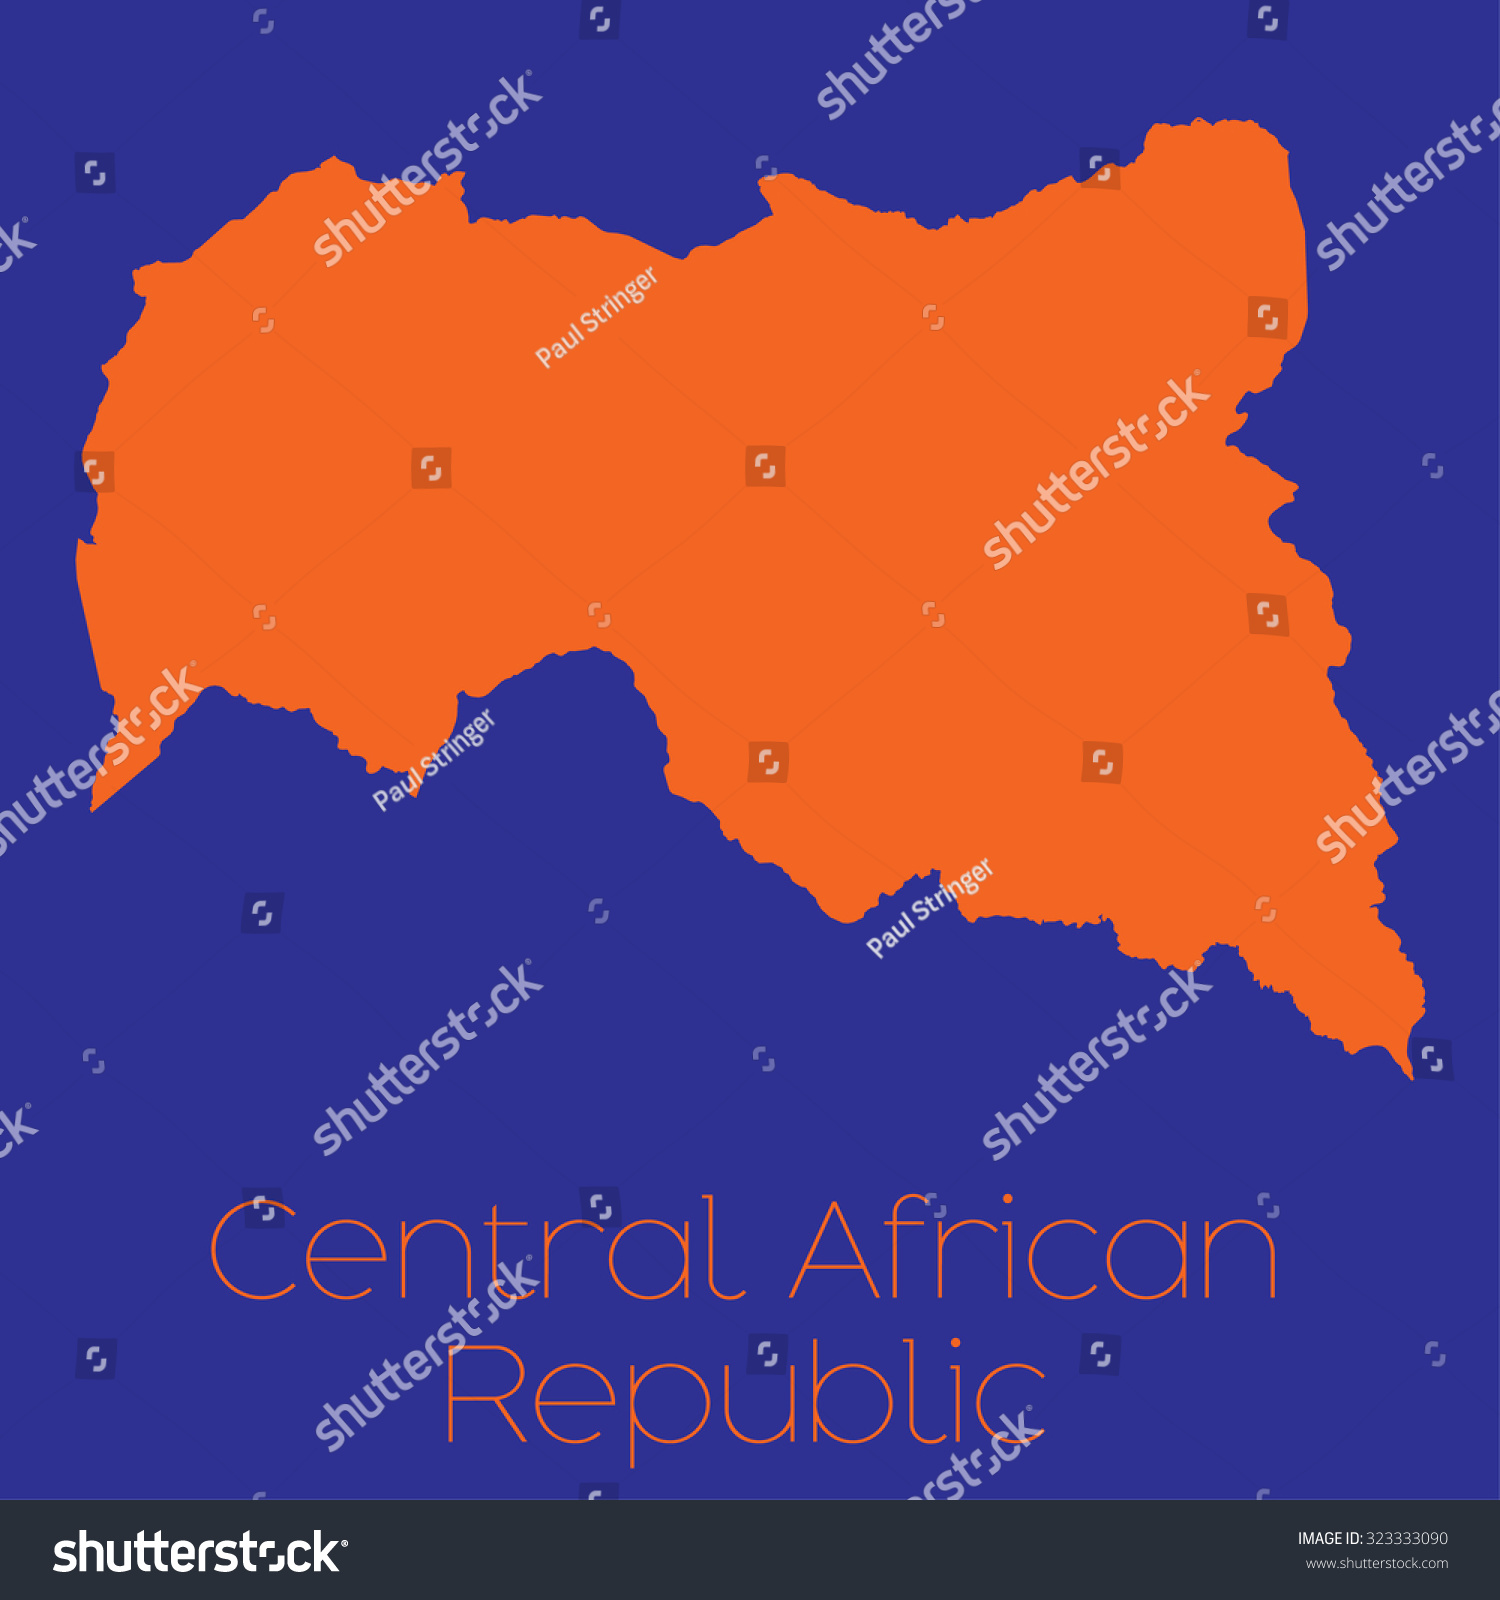 A Map of the country of Central African Republic #323333090